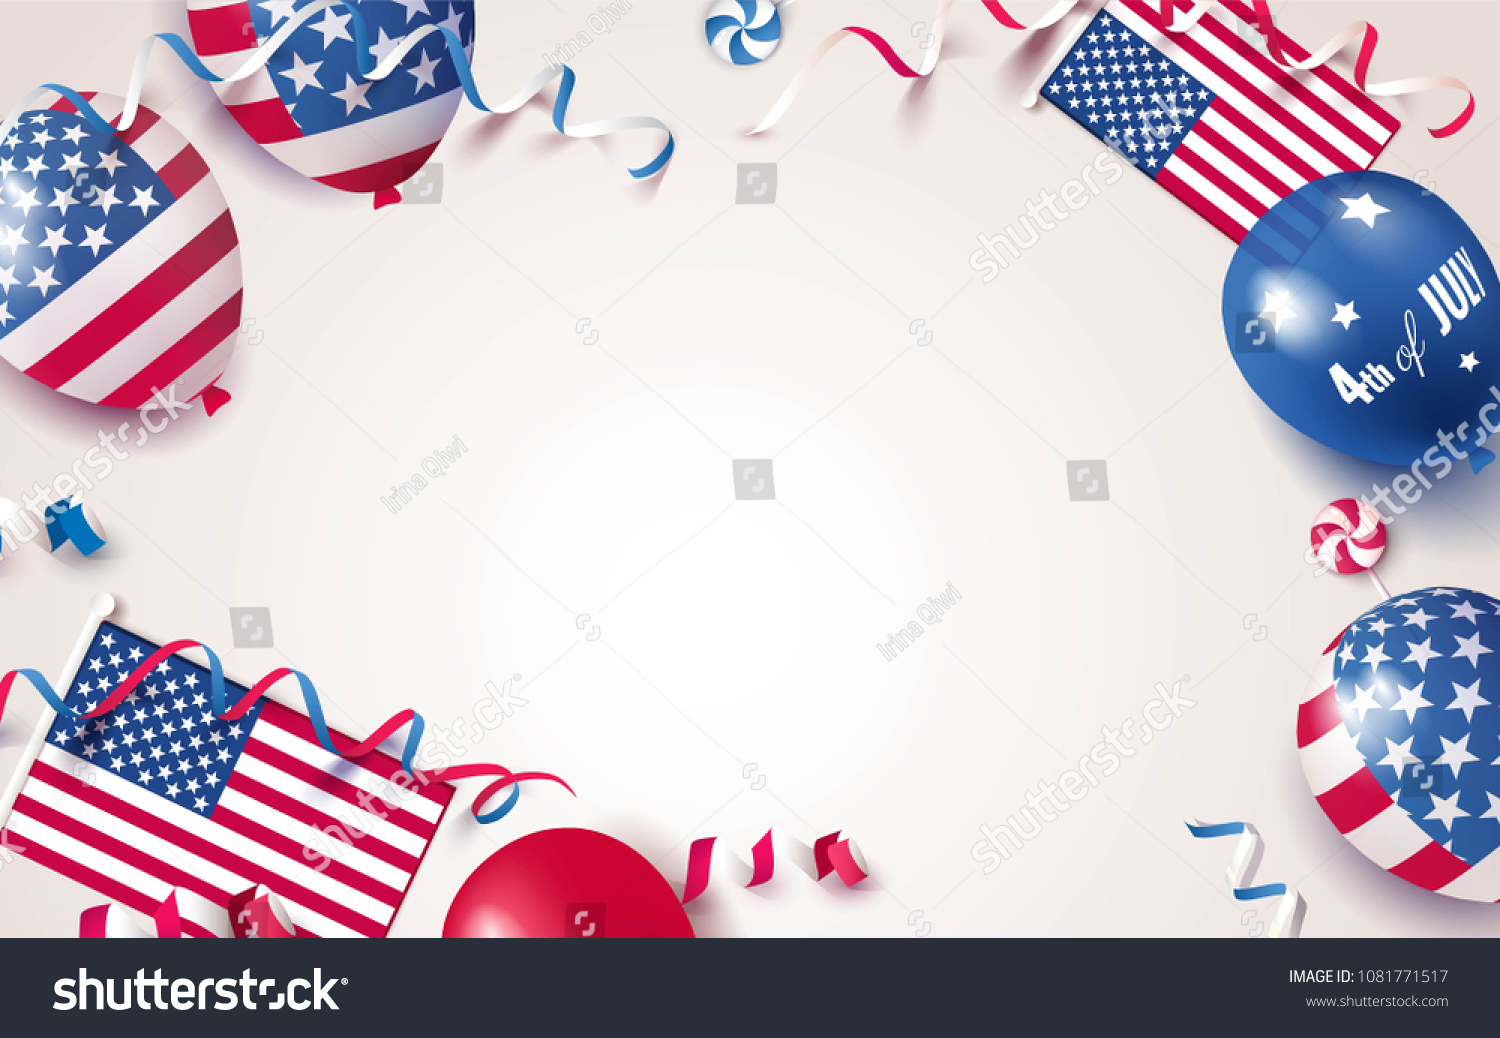 Forth of July Confetti with Free Shipping in USA